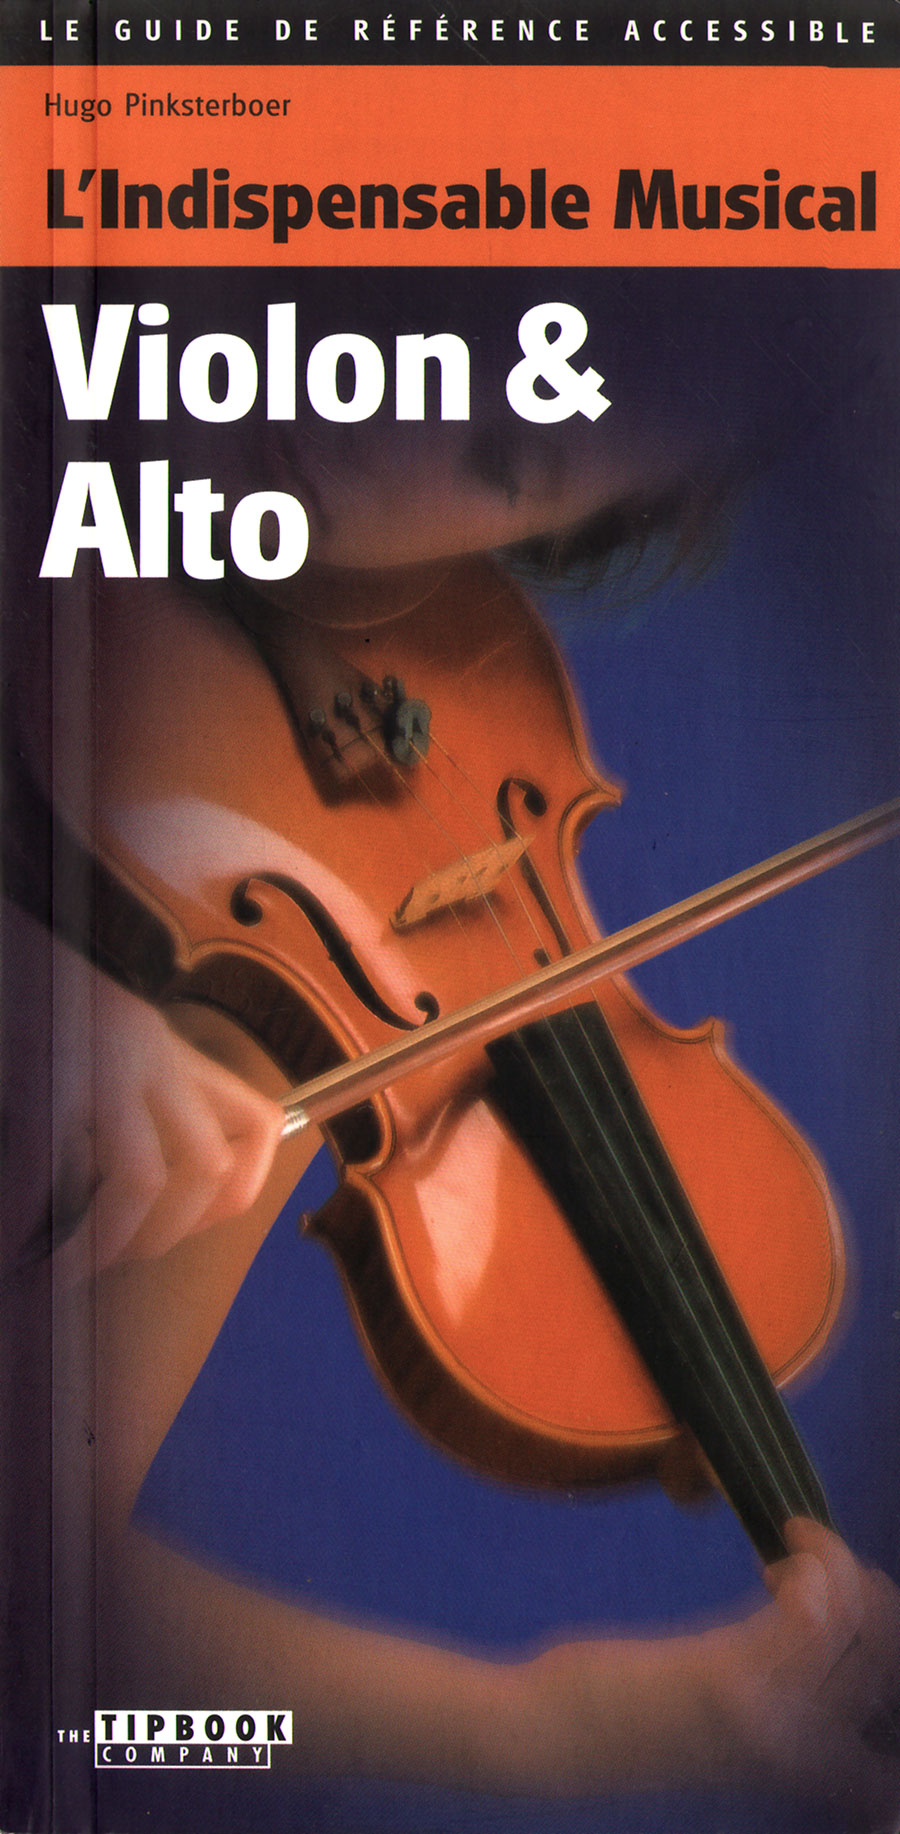 L'indispensable Musical - Violon & Alto - Hugo Pinksterboer - The Tipbook Company